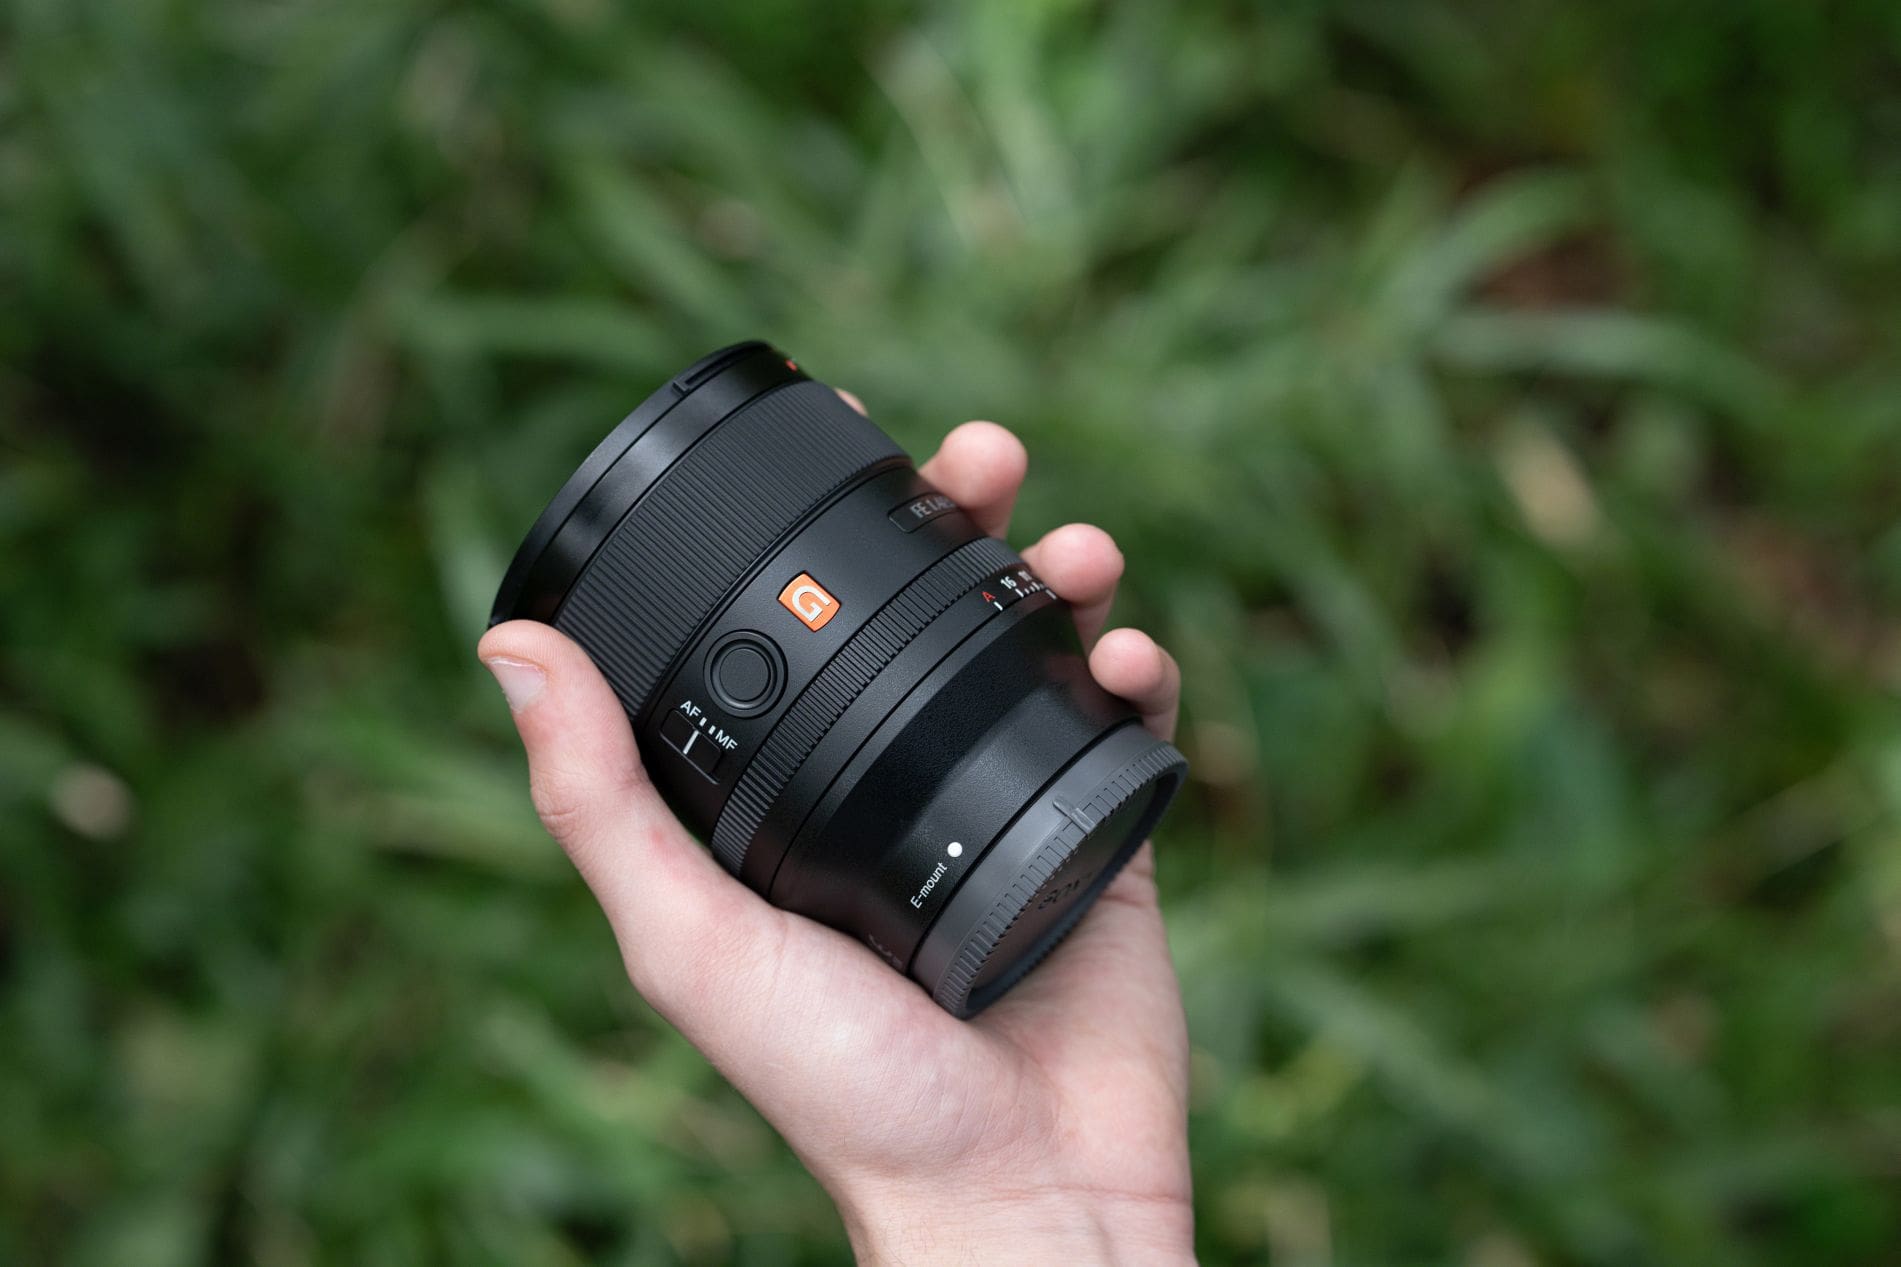 Sony continues to expand its lens line up with the arrival of the new FE 35mm F1.4 GM, the newest addition to its acclaimed G Master full-frame